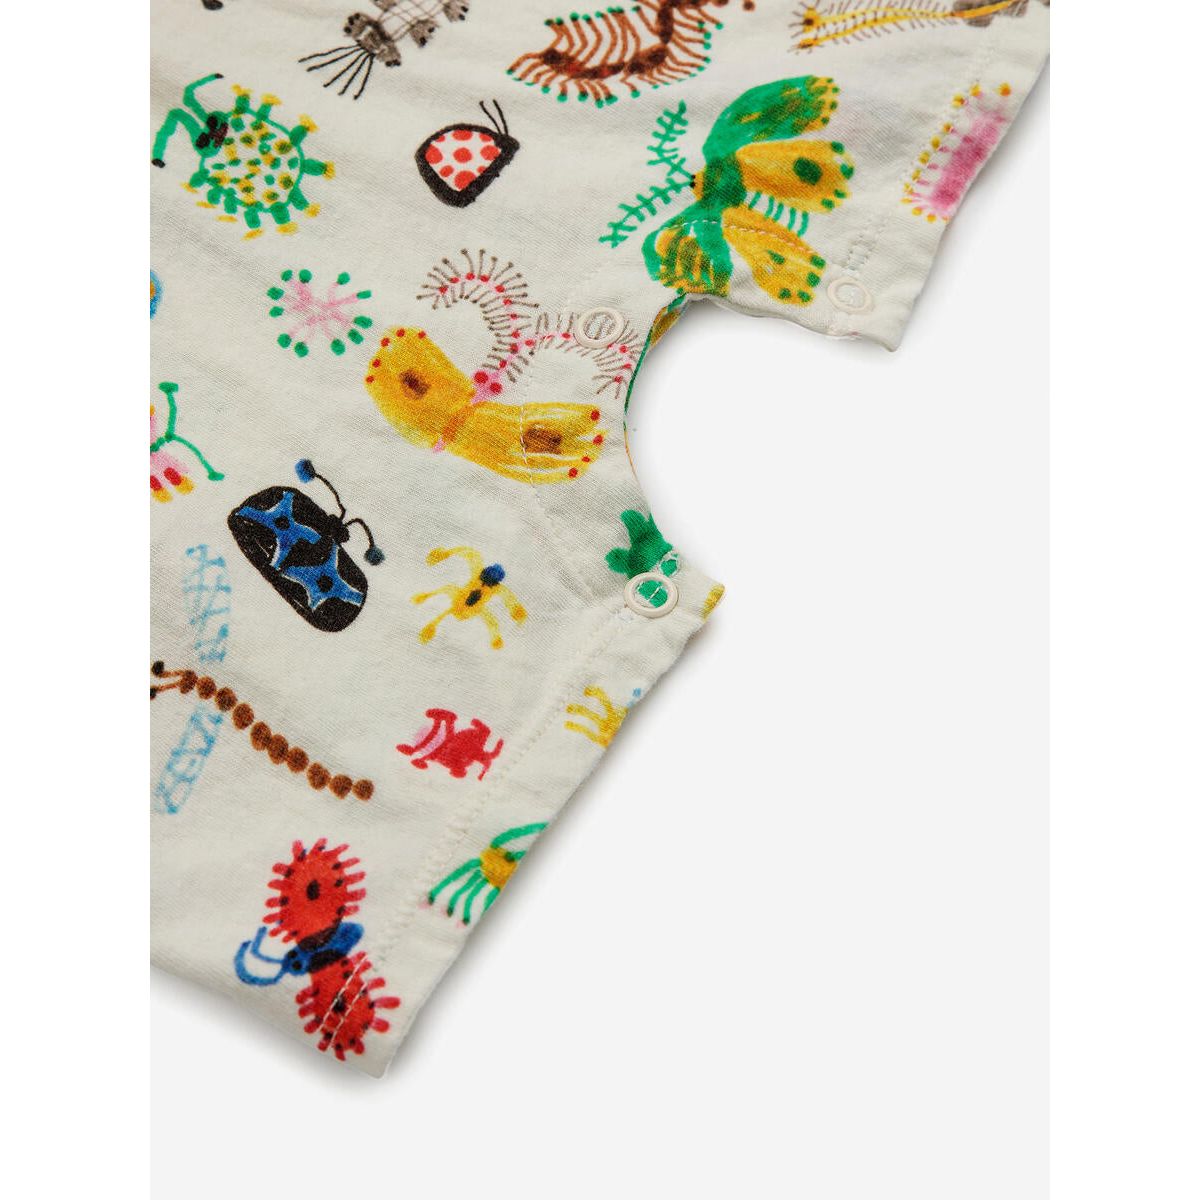 Baby Fuuny Insects All Over Playsuit